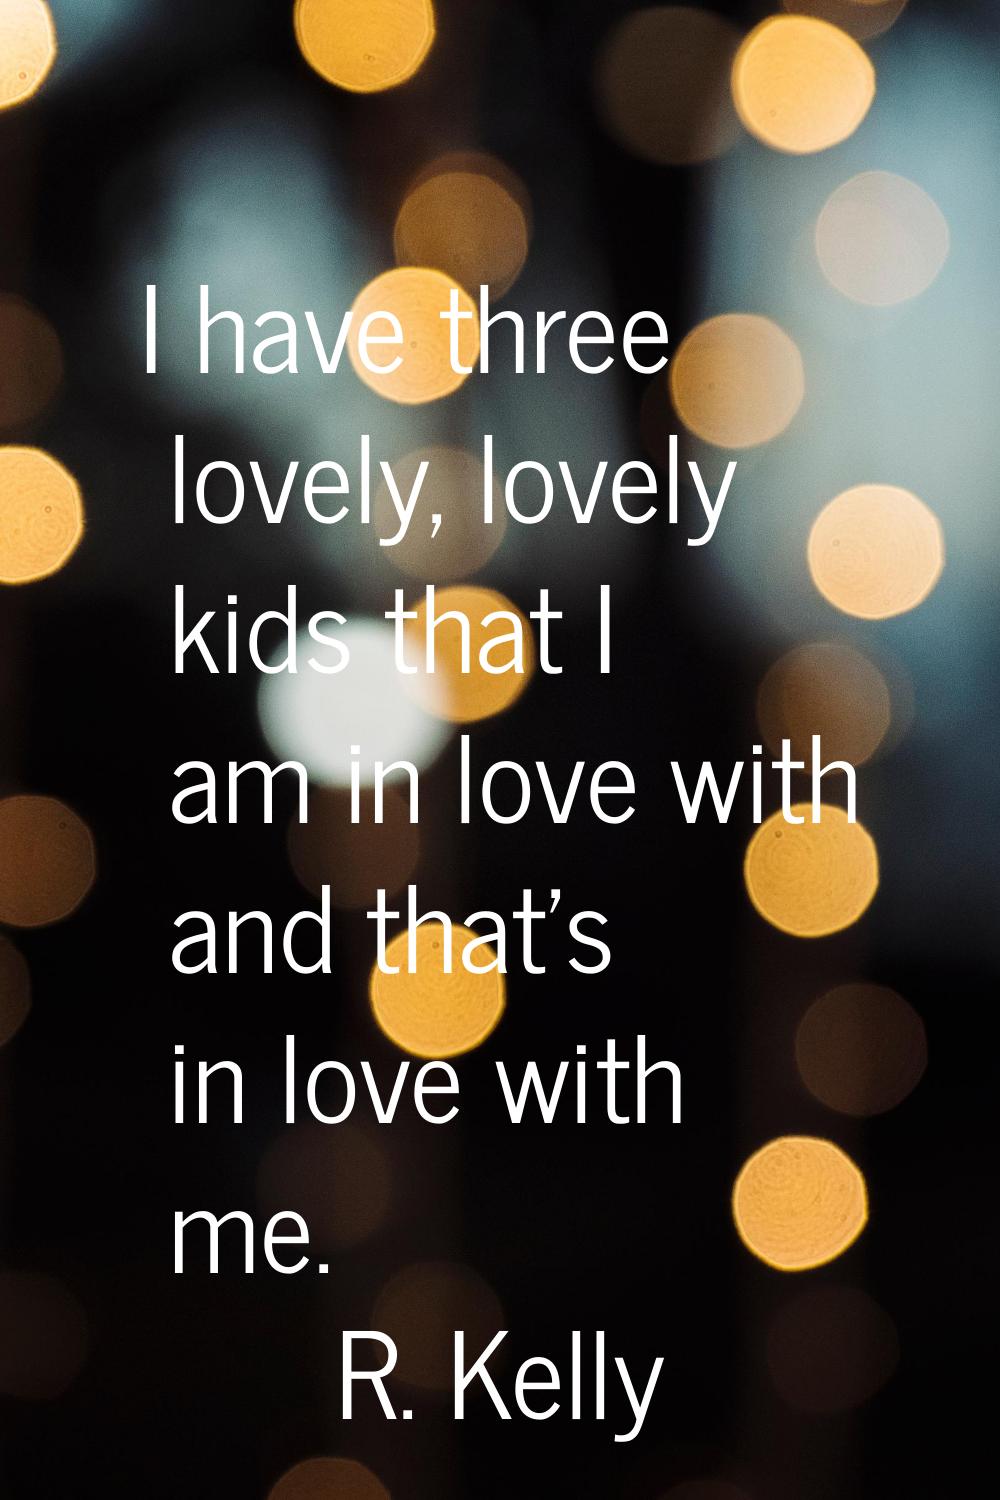 I have three lovely, lovely kids that I am in love with and that's in love with me.